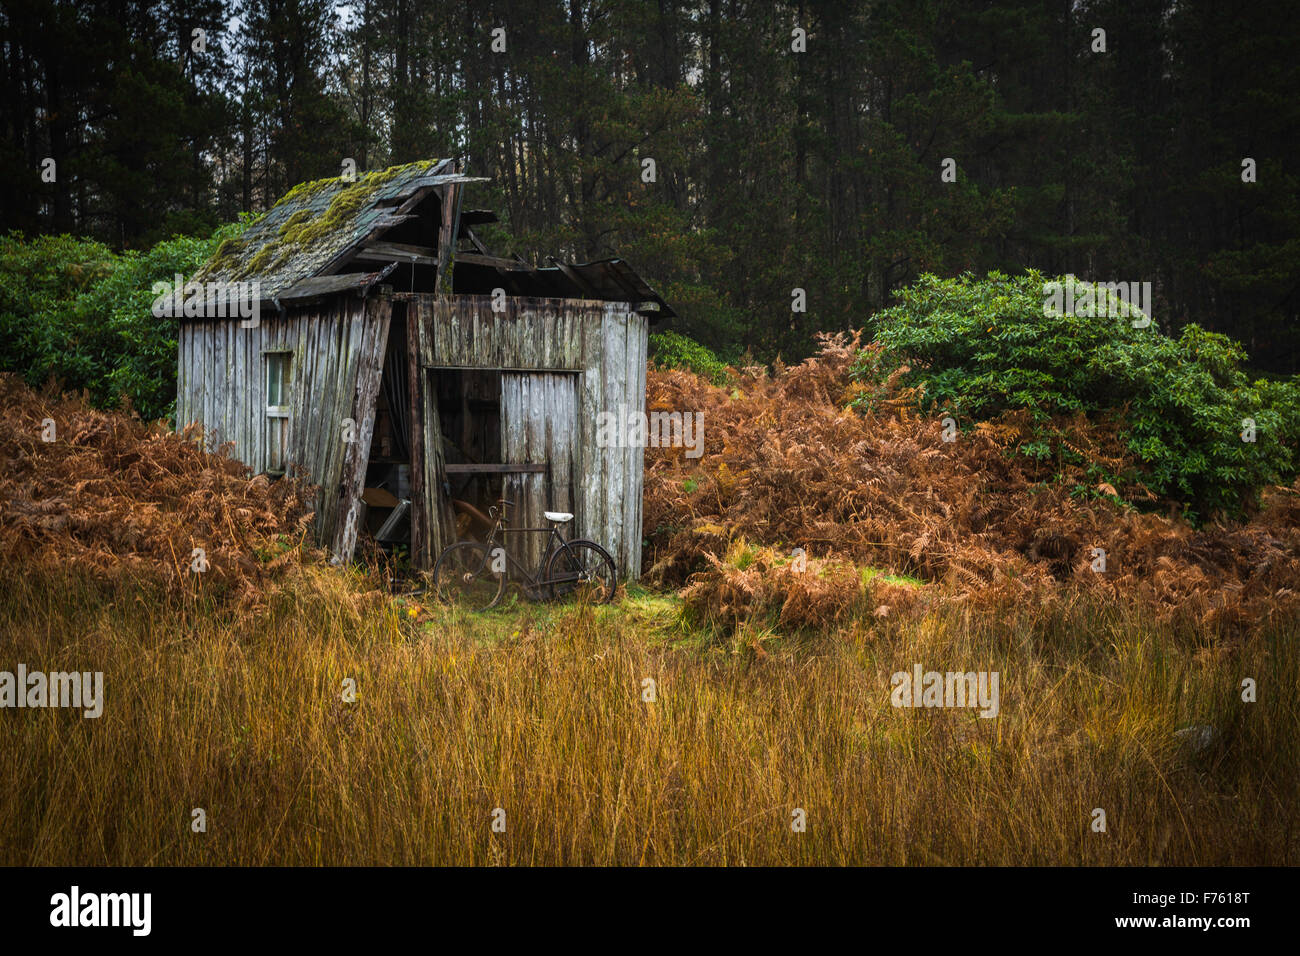 Delapidated wooden shed in a forest setting with parked bicycle and autumn colours. Stock Photo